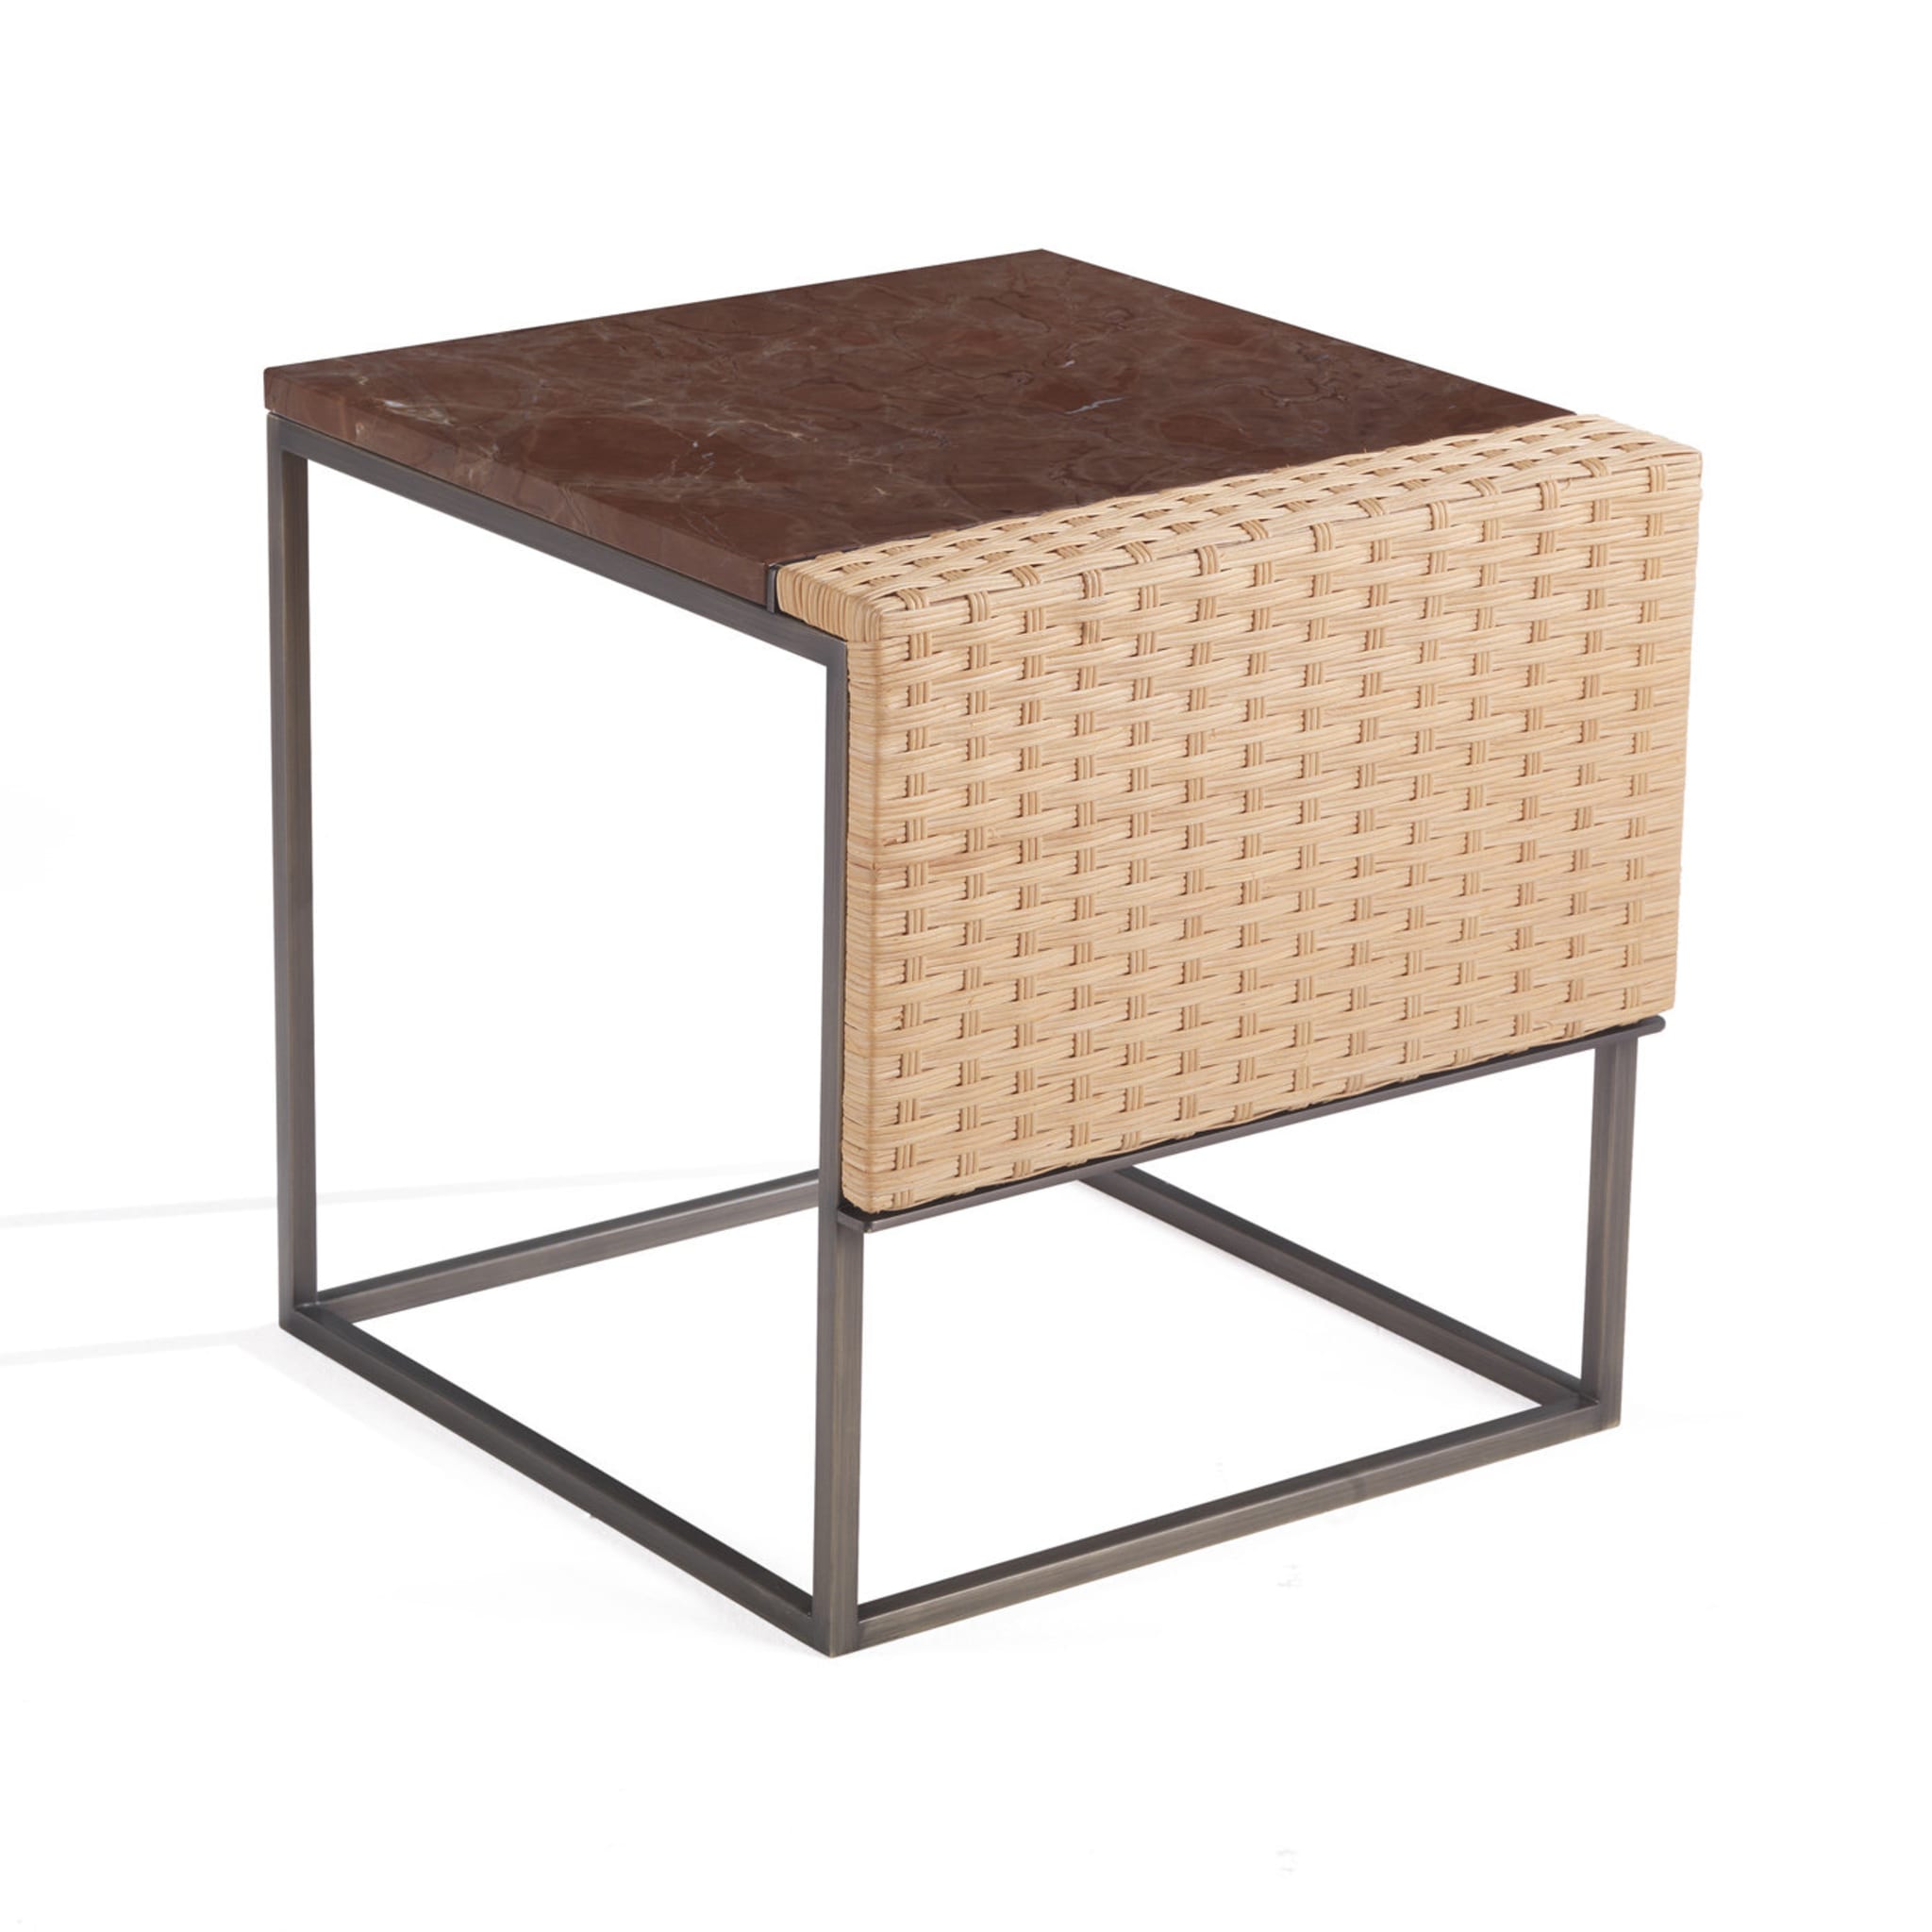 Good Times Ed/20 209 Side Table By Studio Mamo - Alternative view 1